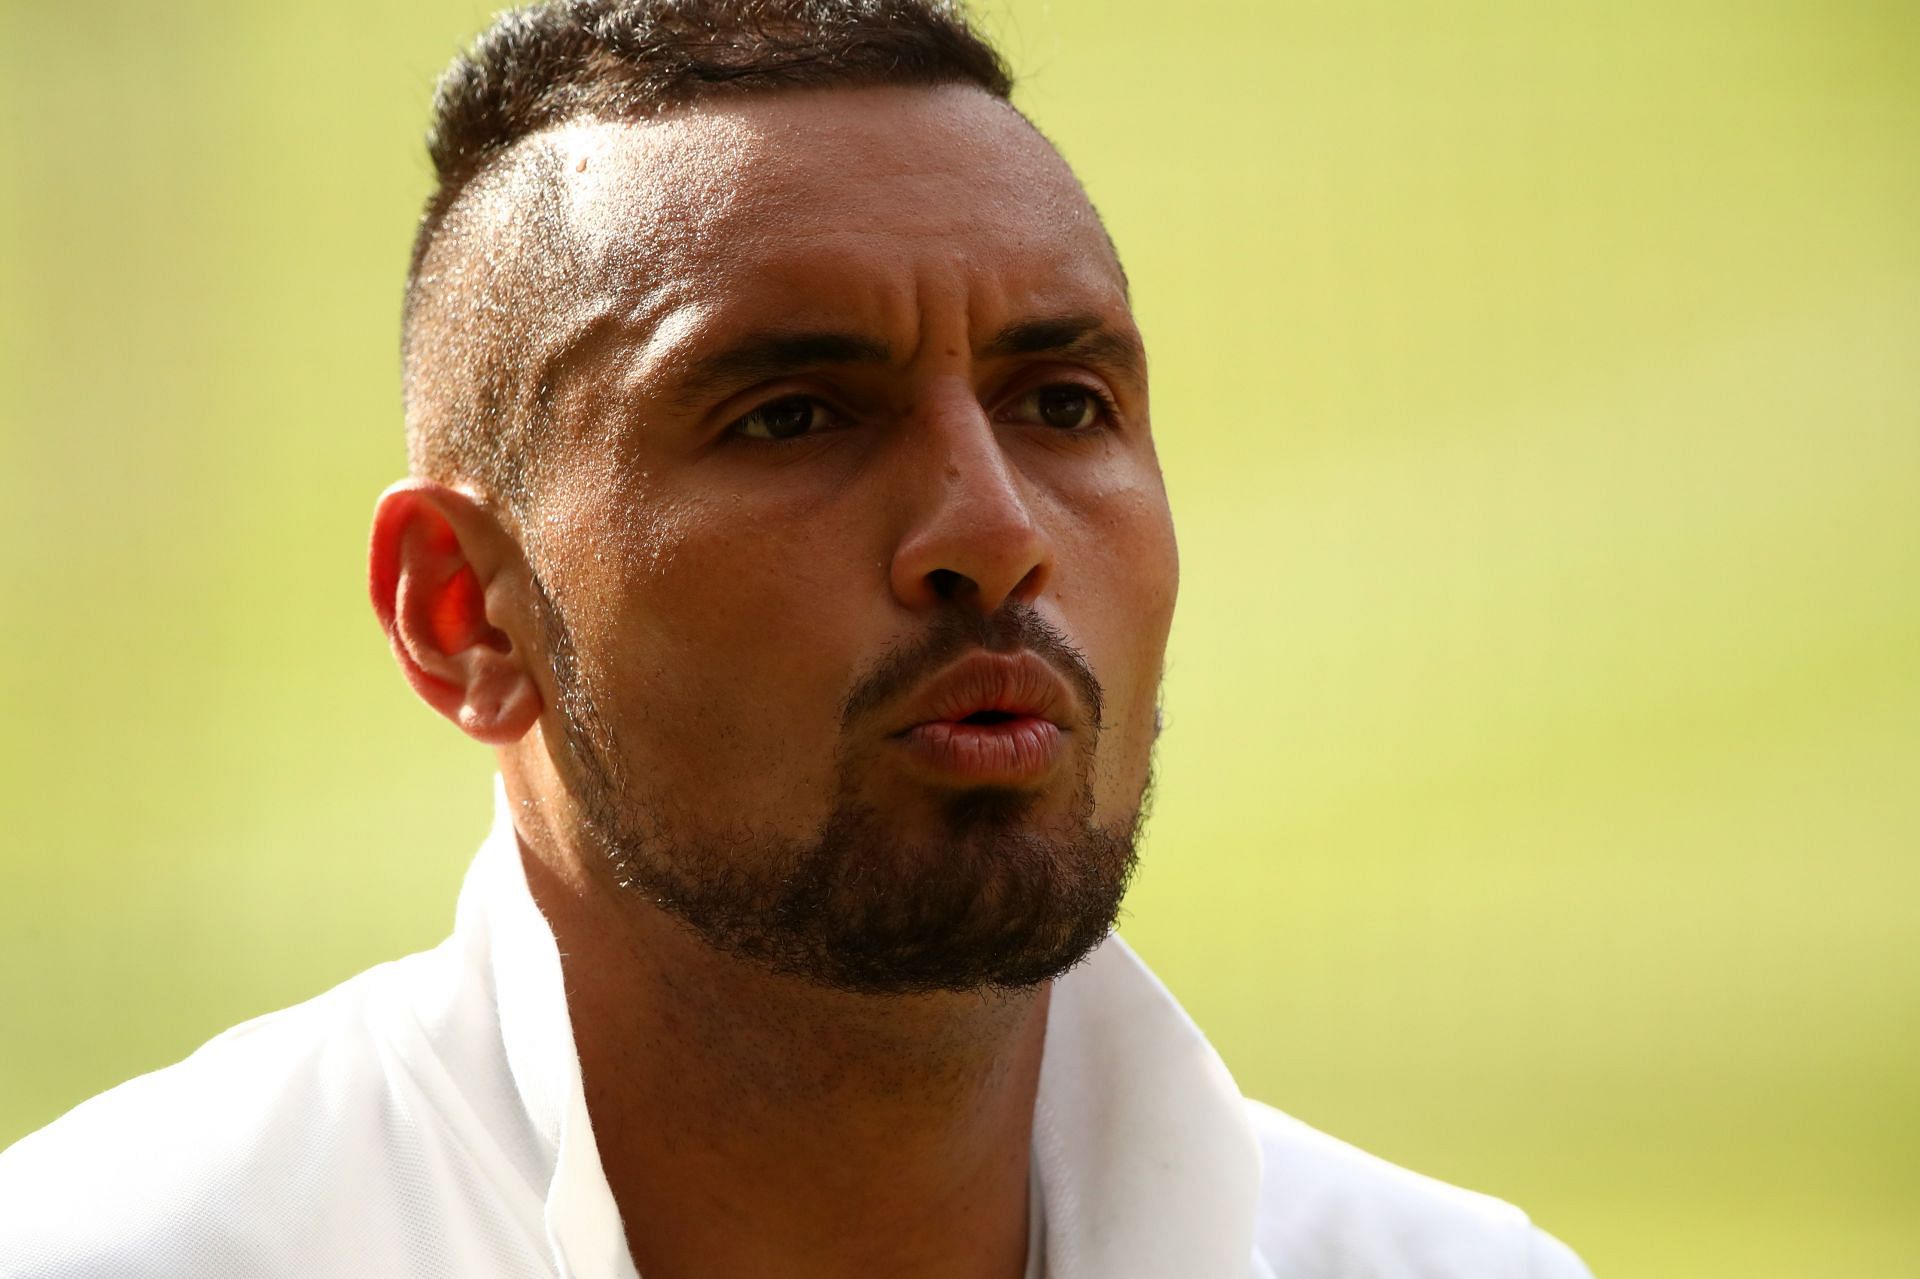 Nick Kyrgios reacts during his second-round loss to Nadal at Wimbledon 2019